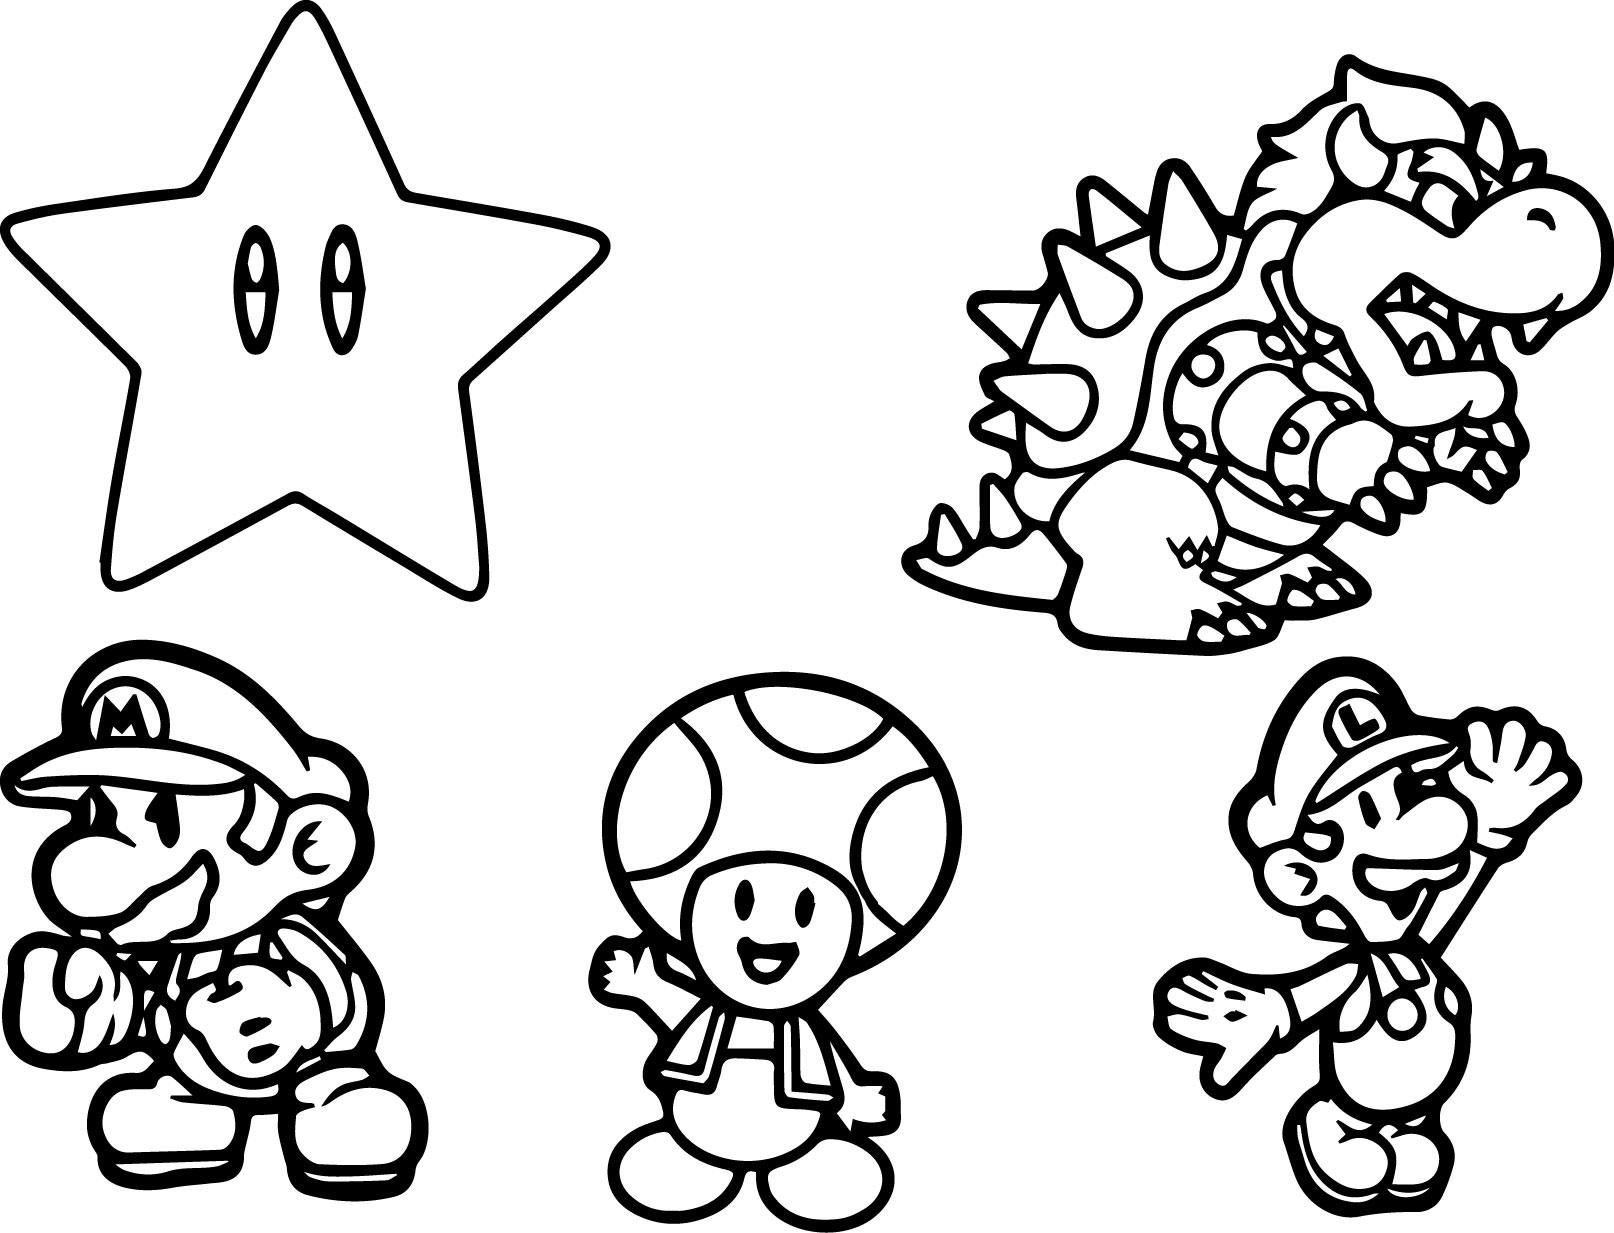 Mario Characters Coloring Pages